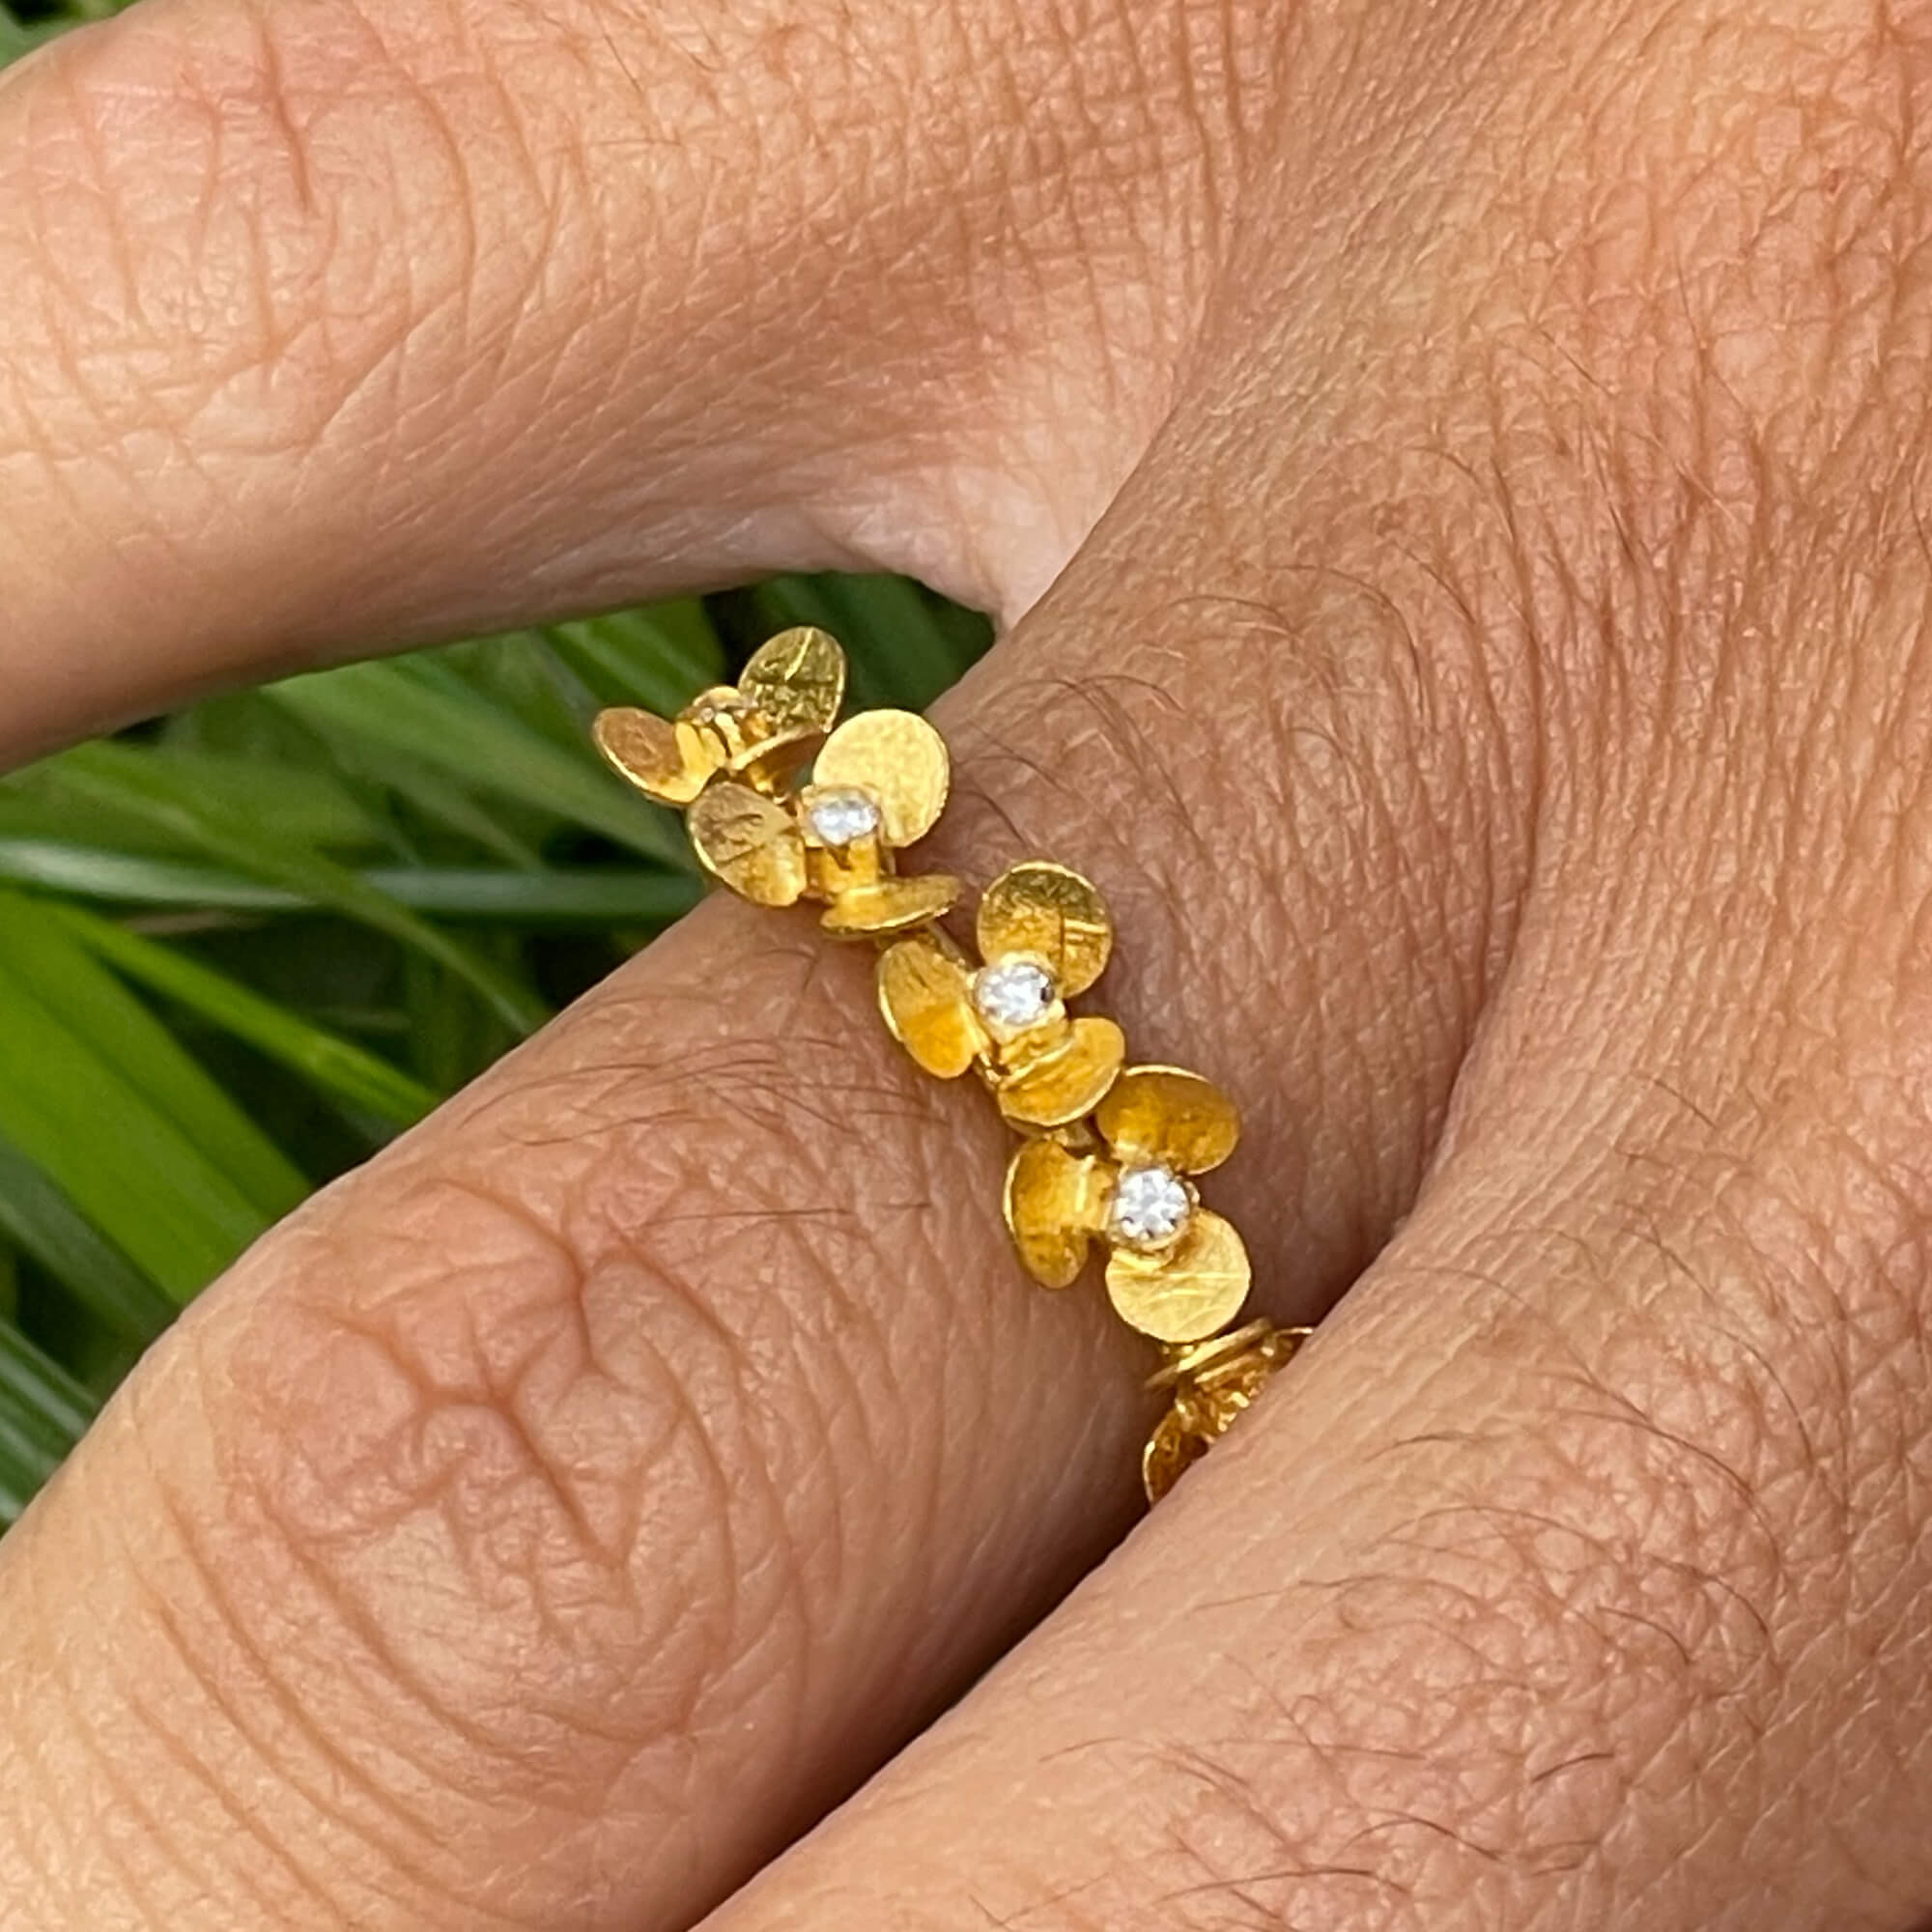 Refined gold ring of 18kt with some diamonds